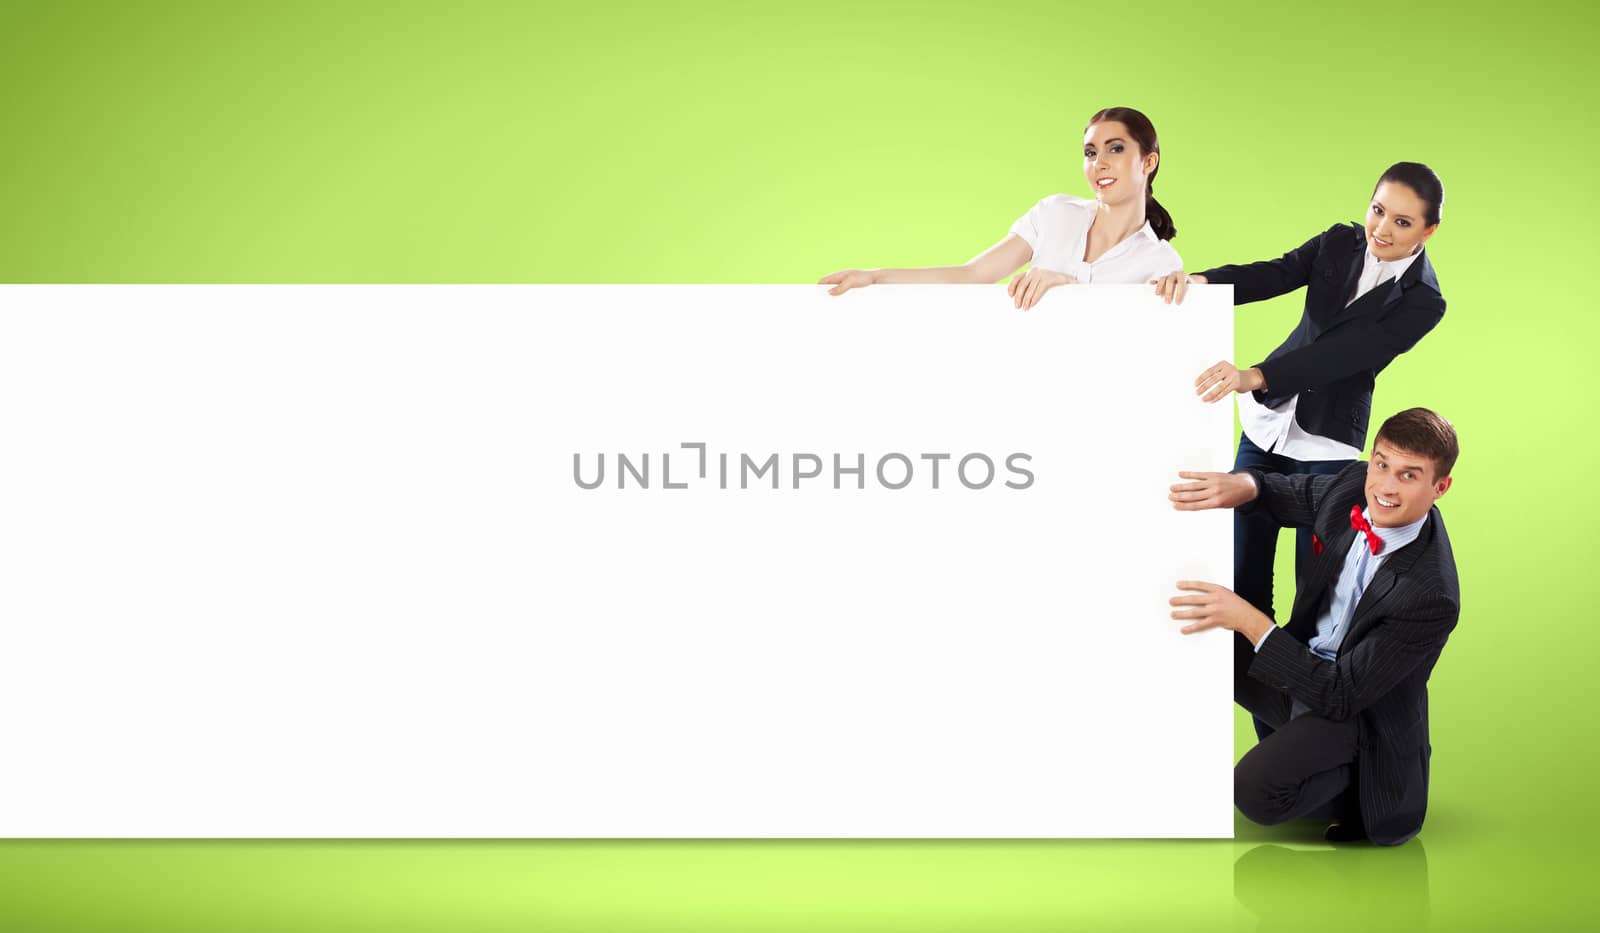 Image of three young people holding blank banner against green background. Place for text